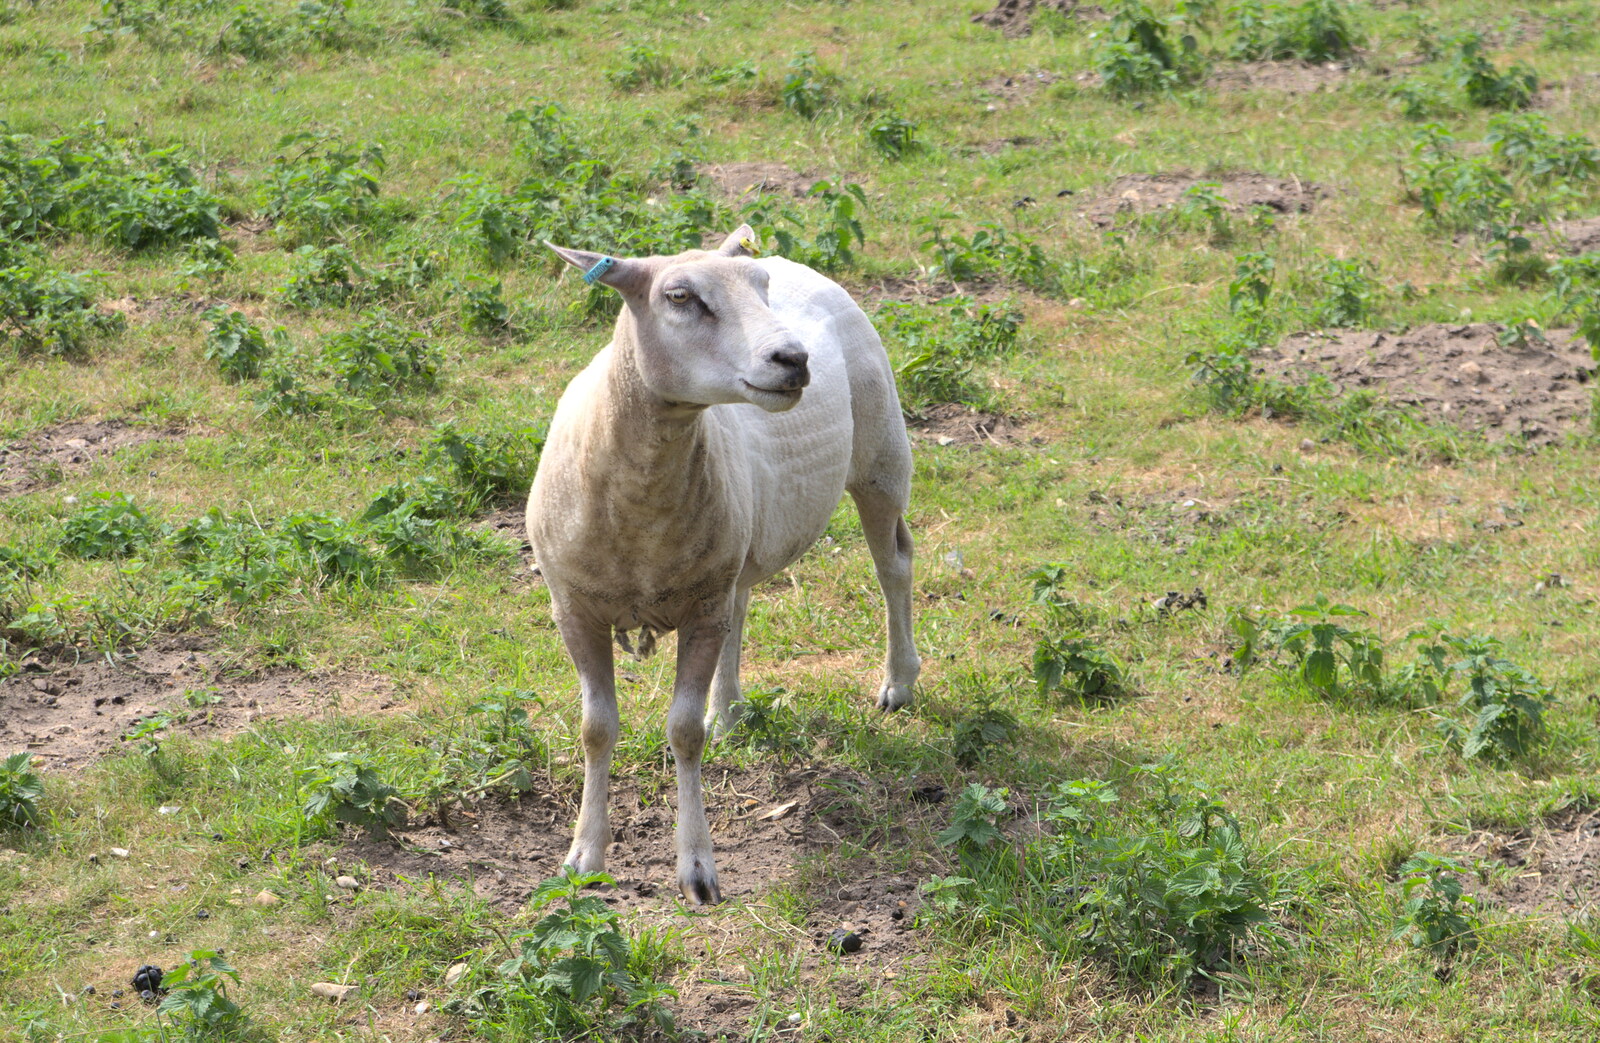 Shorn the sheep from Camping at Dower House, West Harling, Norfolk - 1st July 2017